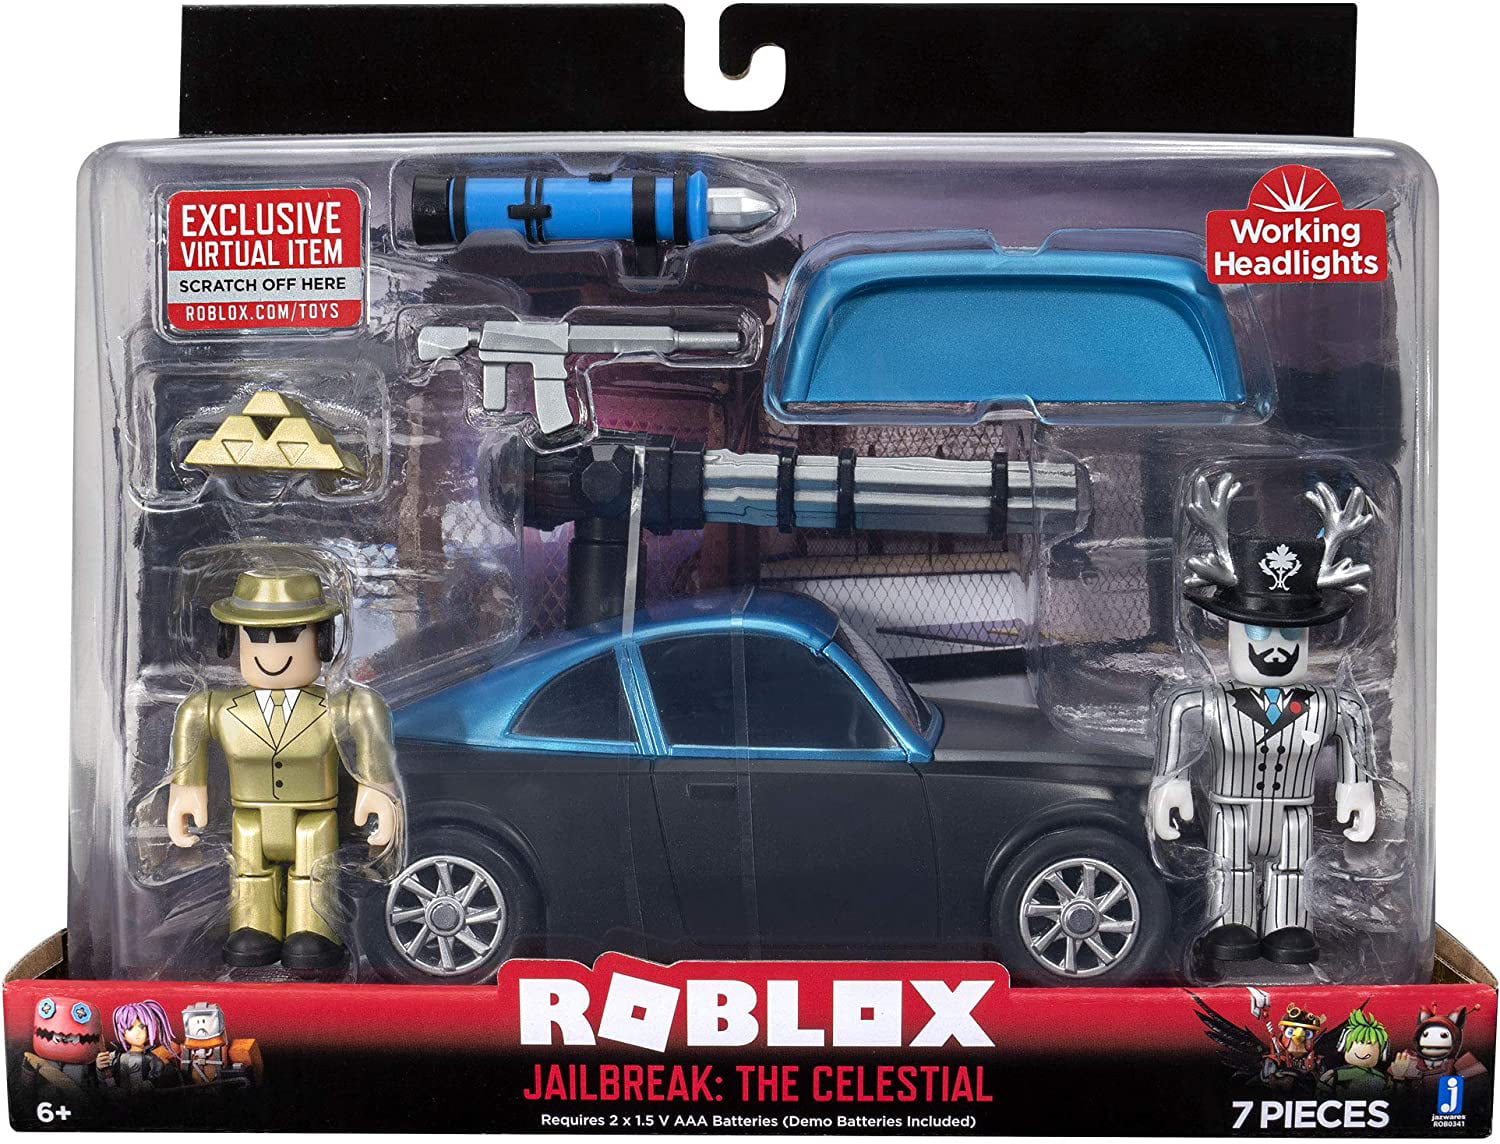 Roblox Action Collection Jailbreak The Celestial Deluxe Vehicle Includes Exclusive Virtual Item Walmart Com Walmart Com - roblox lunch box radio code